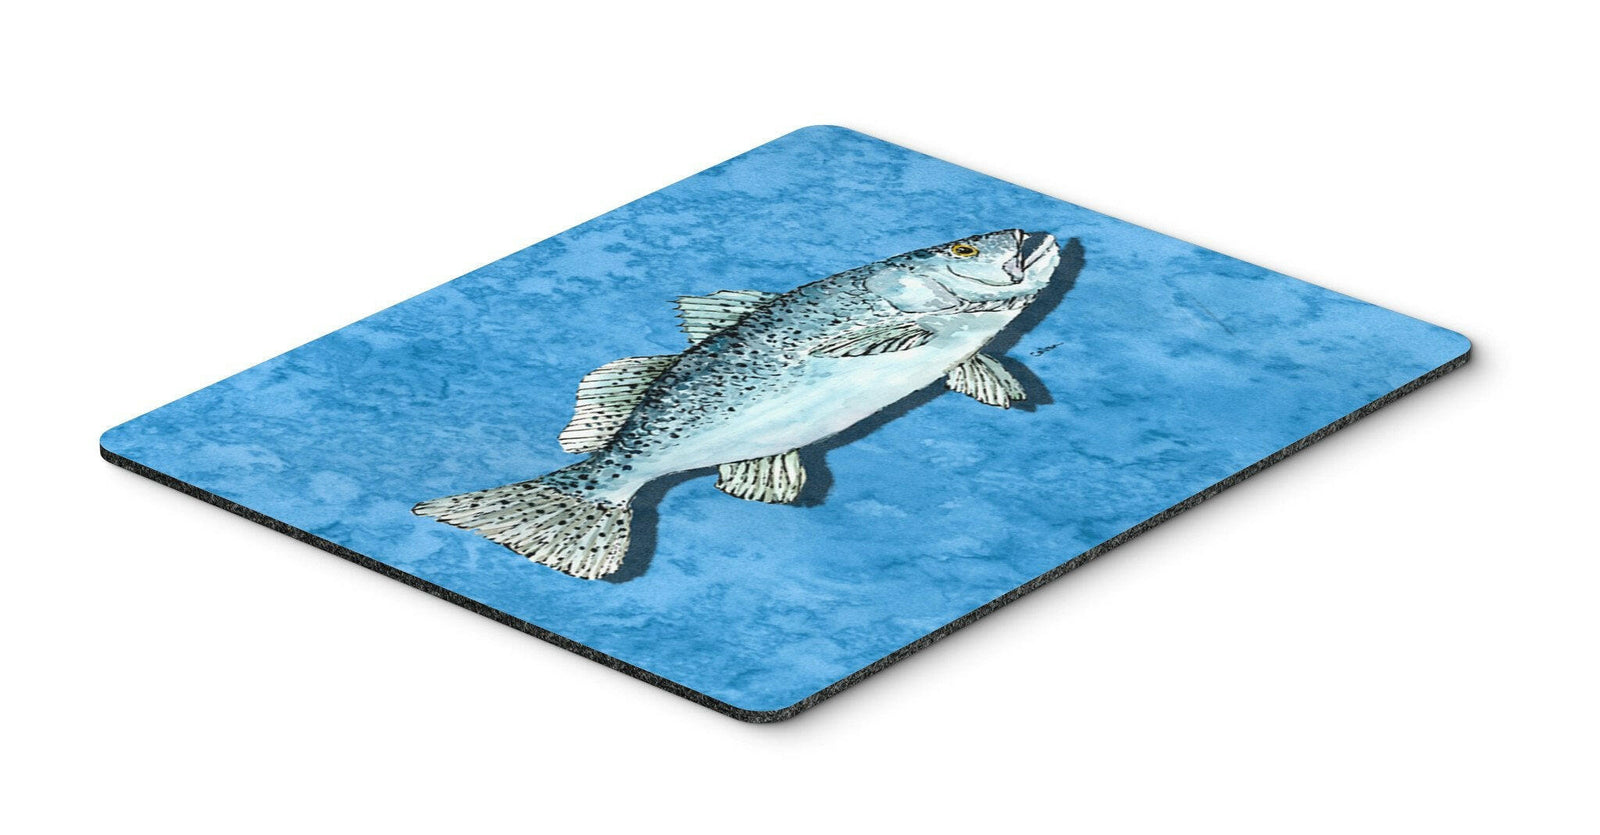 Fish - Trout Mouse pad, hot pad, or trivet by Caroline's Treasures